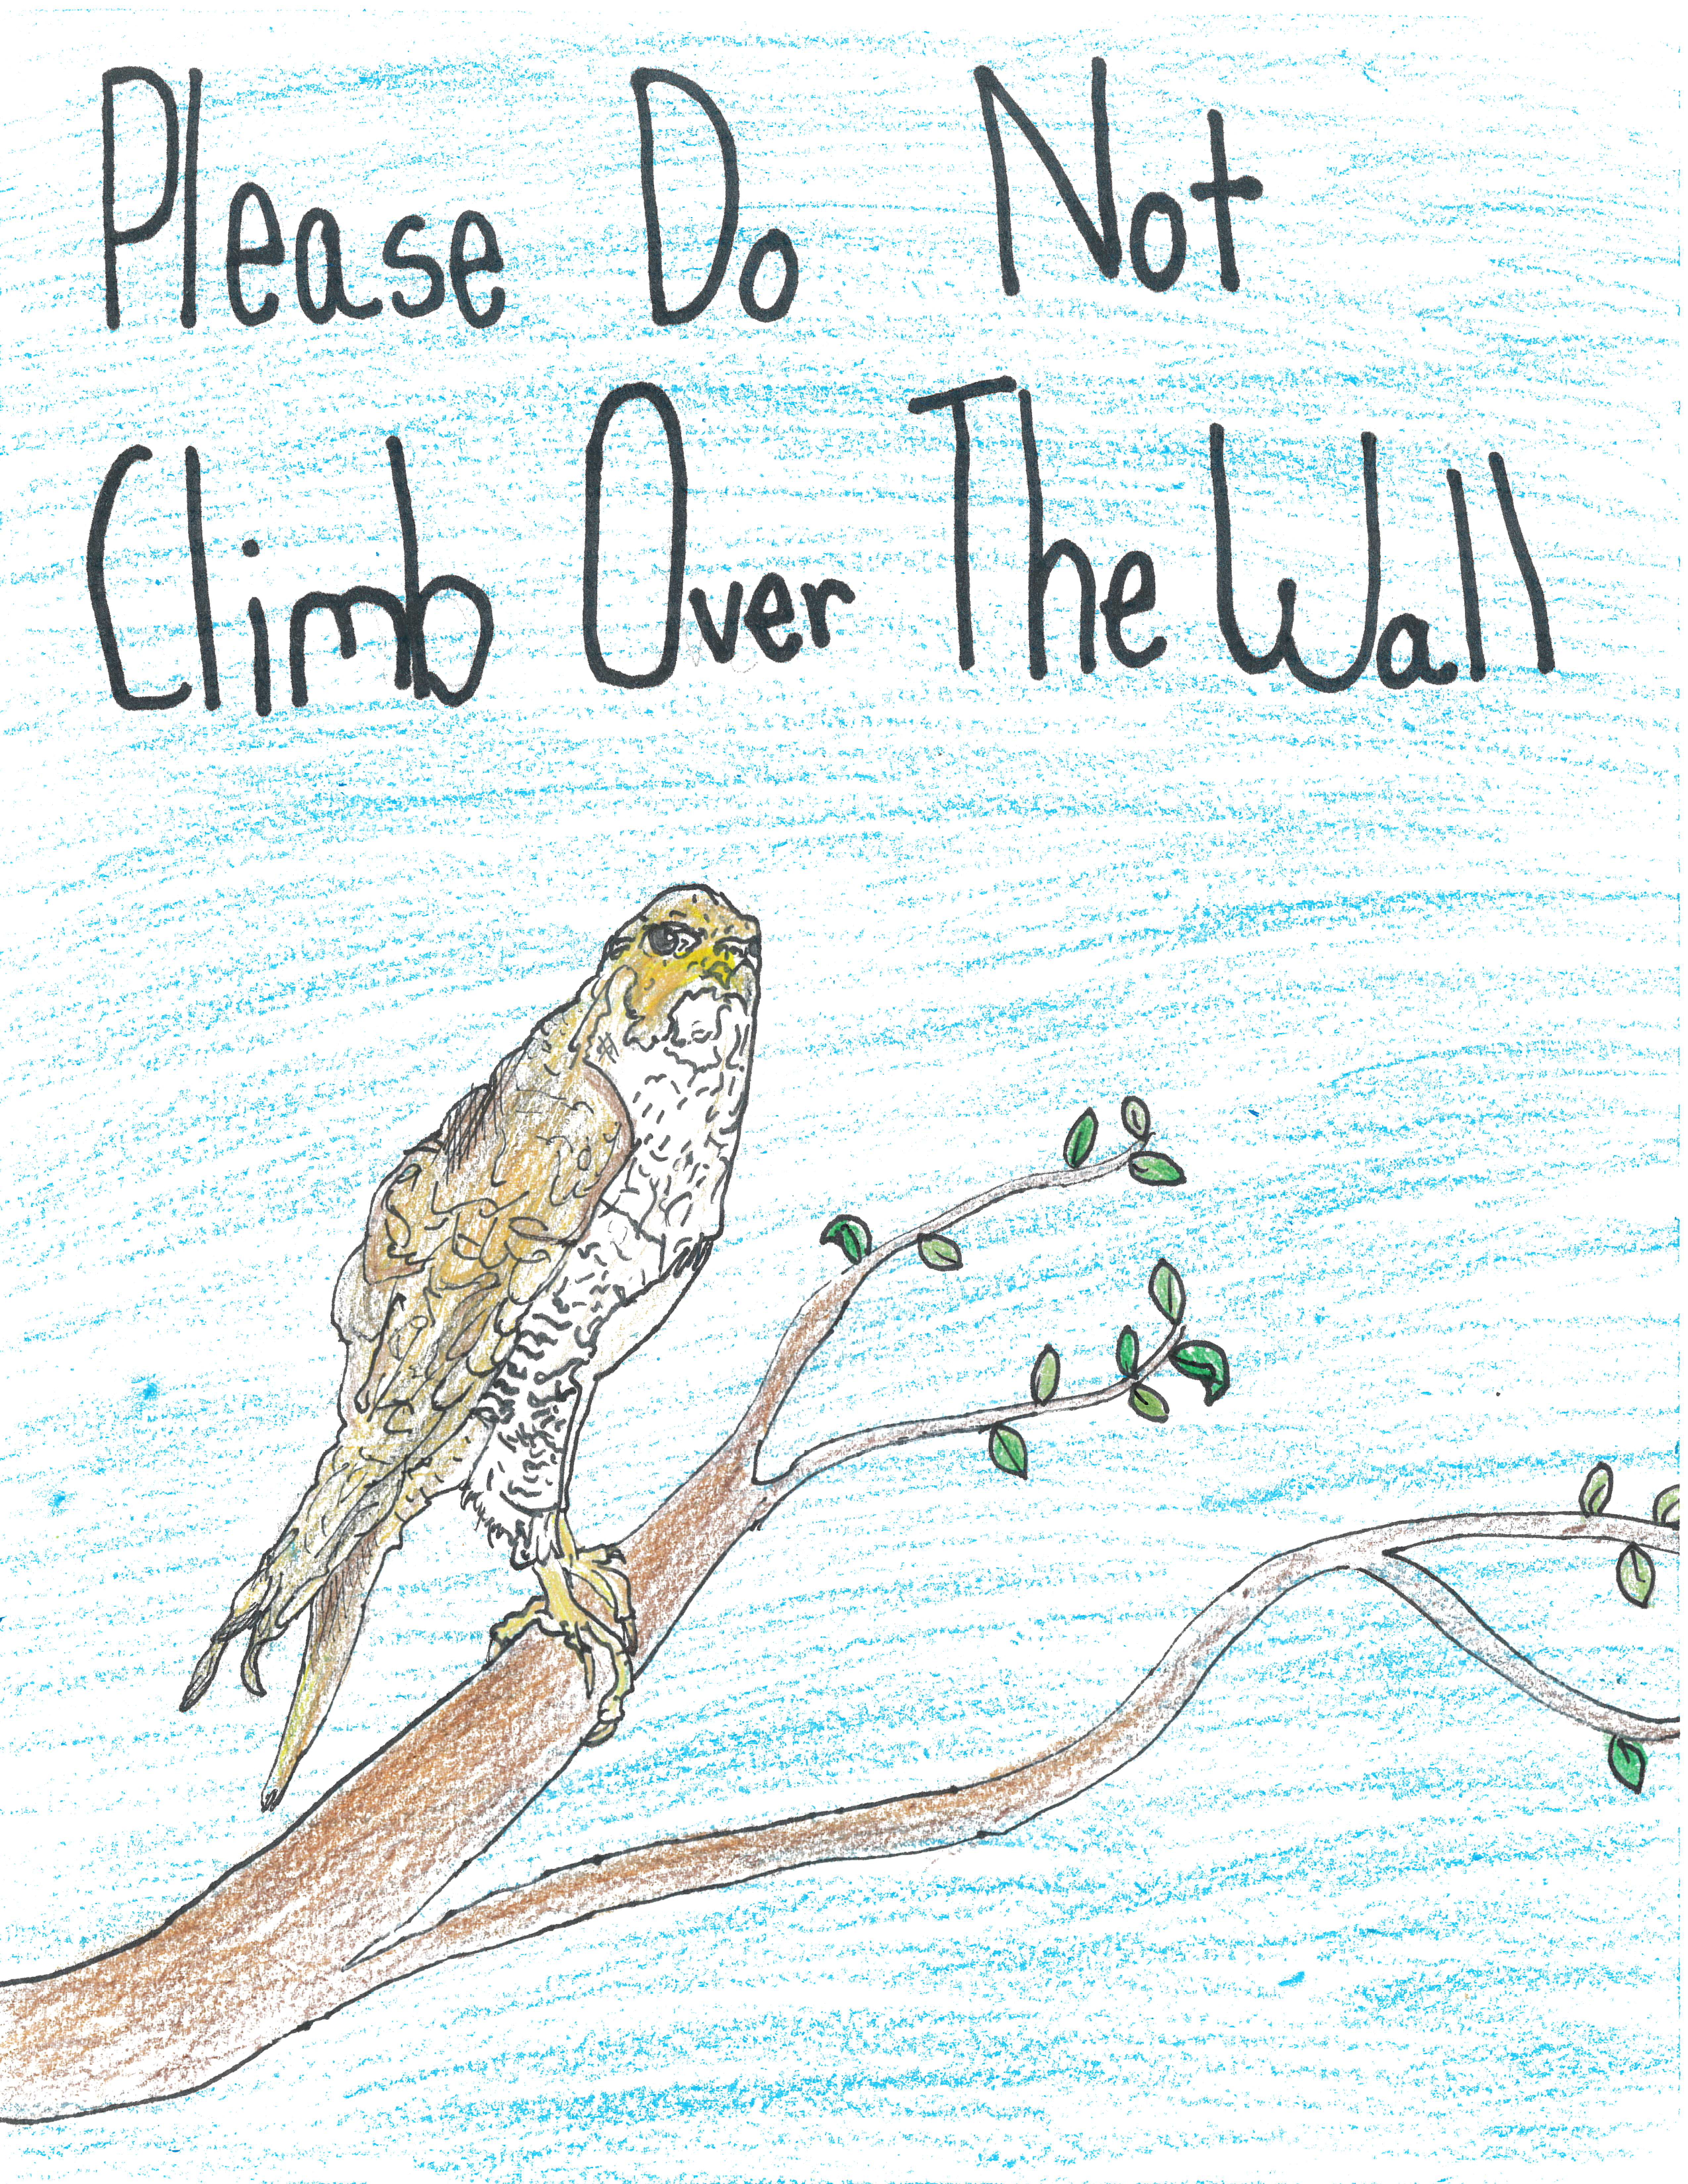 A drawing of a peregrine falcon with text that says "please do not climb over the wall"